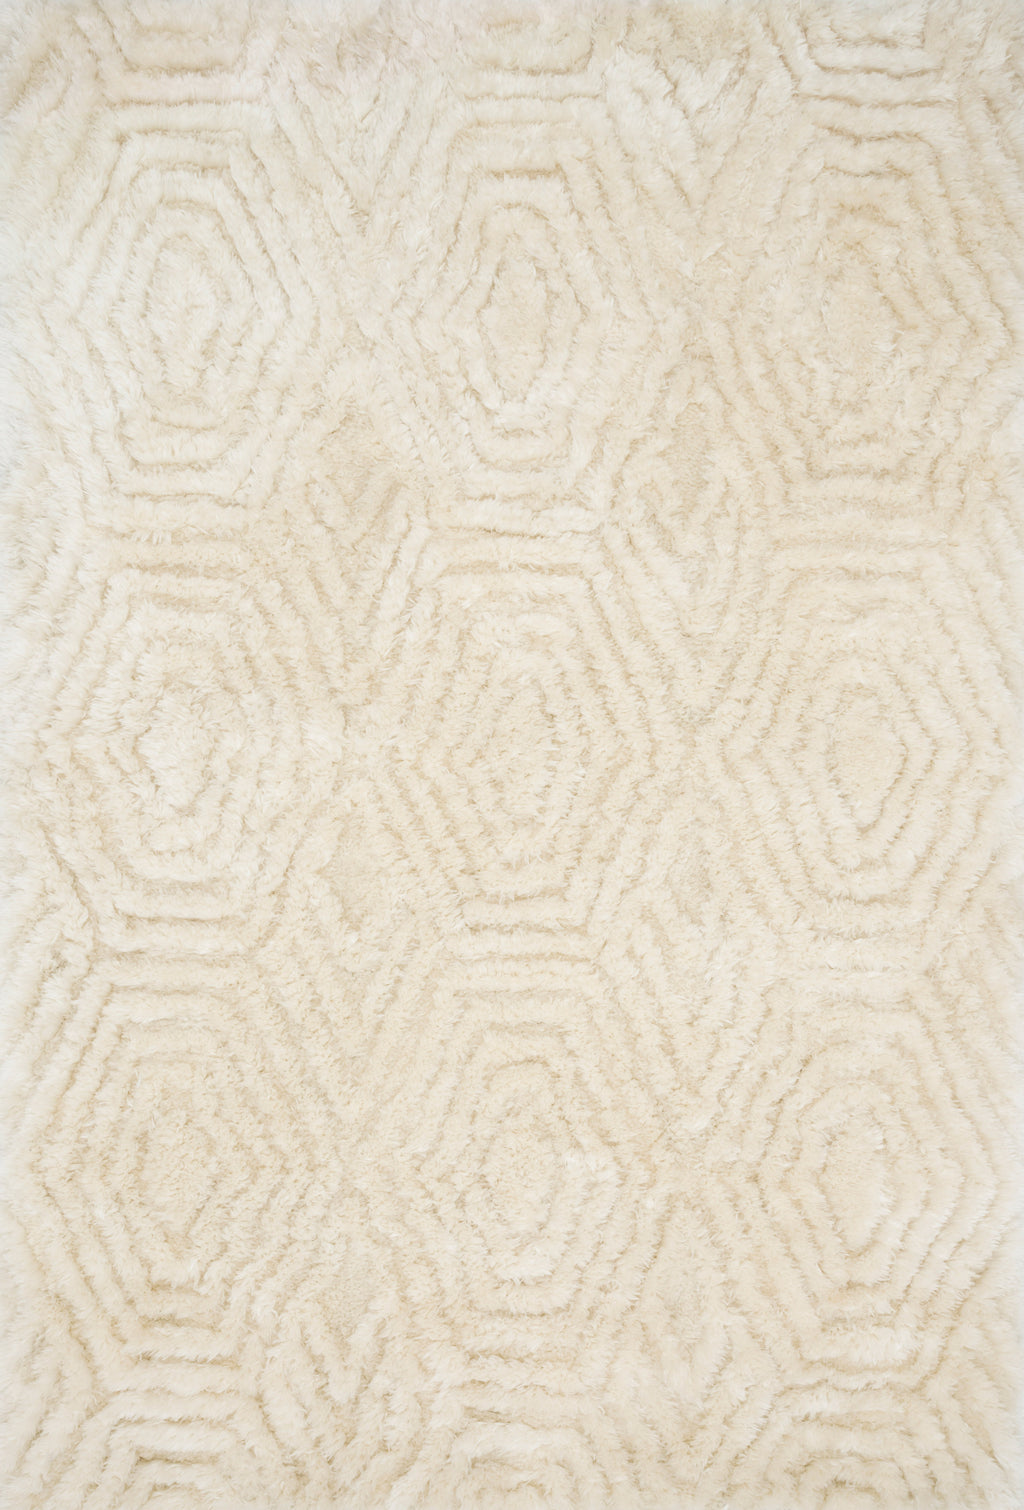 CASPIA Collection Rug  in  IVORY Ivory Small Hand-Tufted Polyester